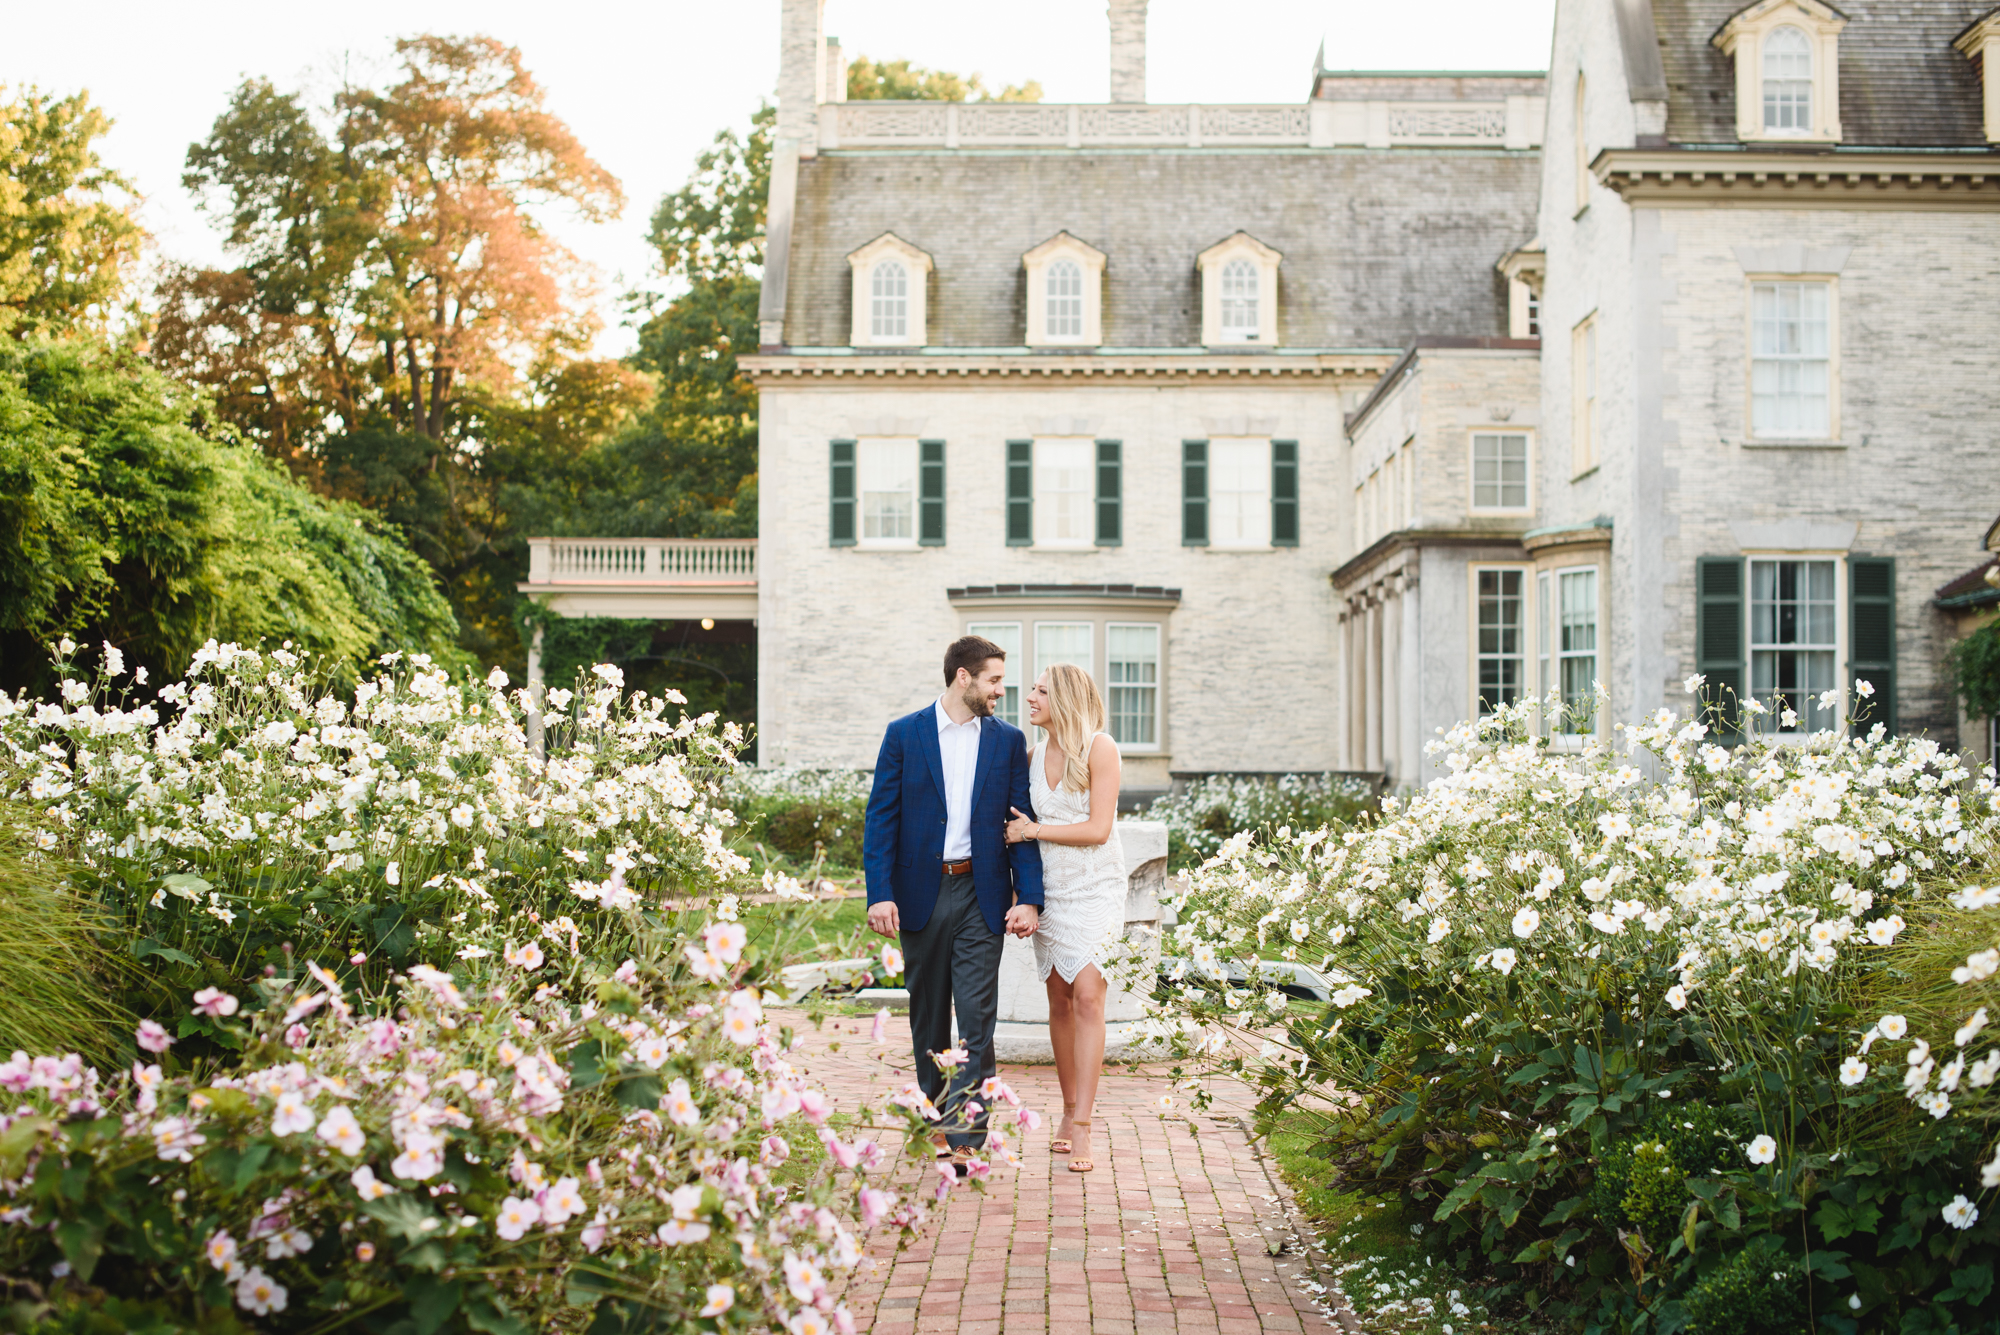 Katie Finnerty George Eastman House Engagement Rochester, NY Engagement Locations | Verve Event Co. #upstatenywedding #nyengagementphoto